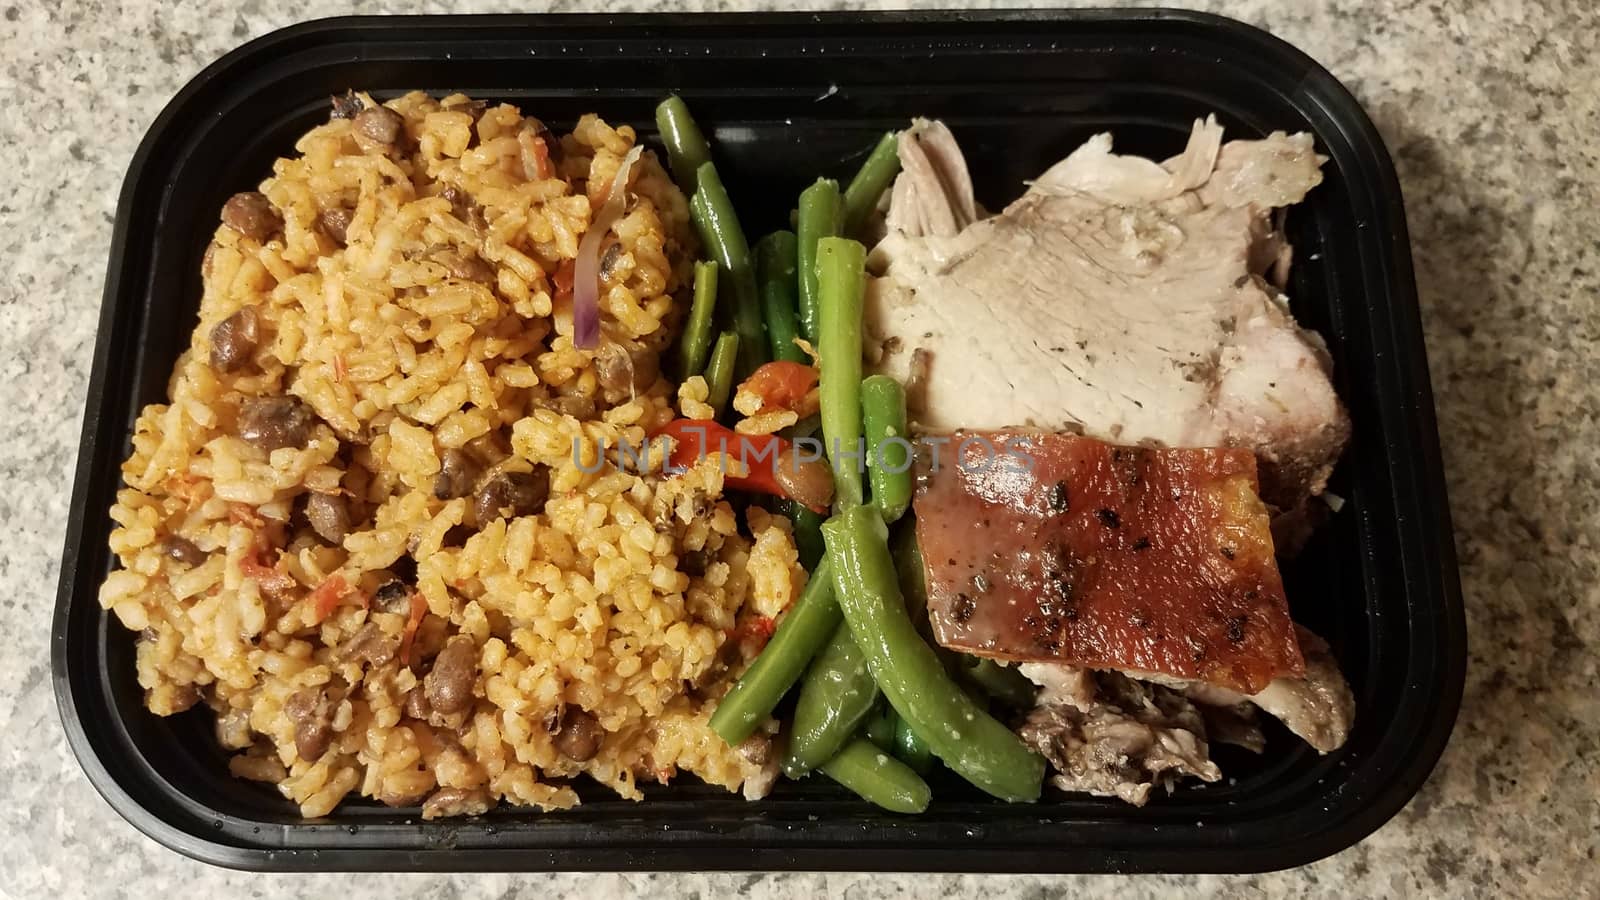 Puerto Rican pork and rice and beans in container by stockphotofan1